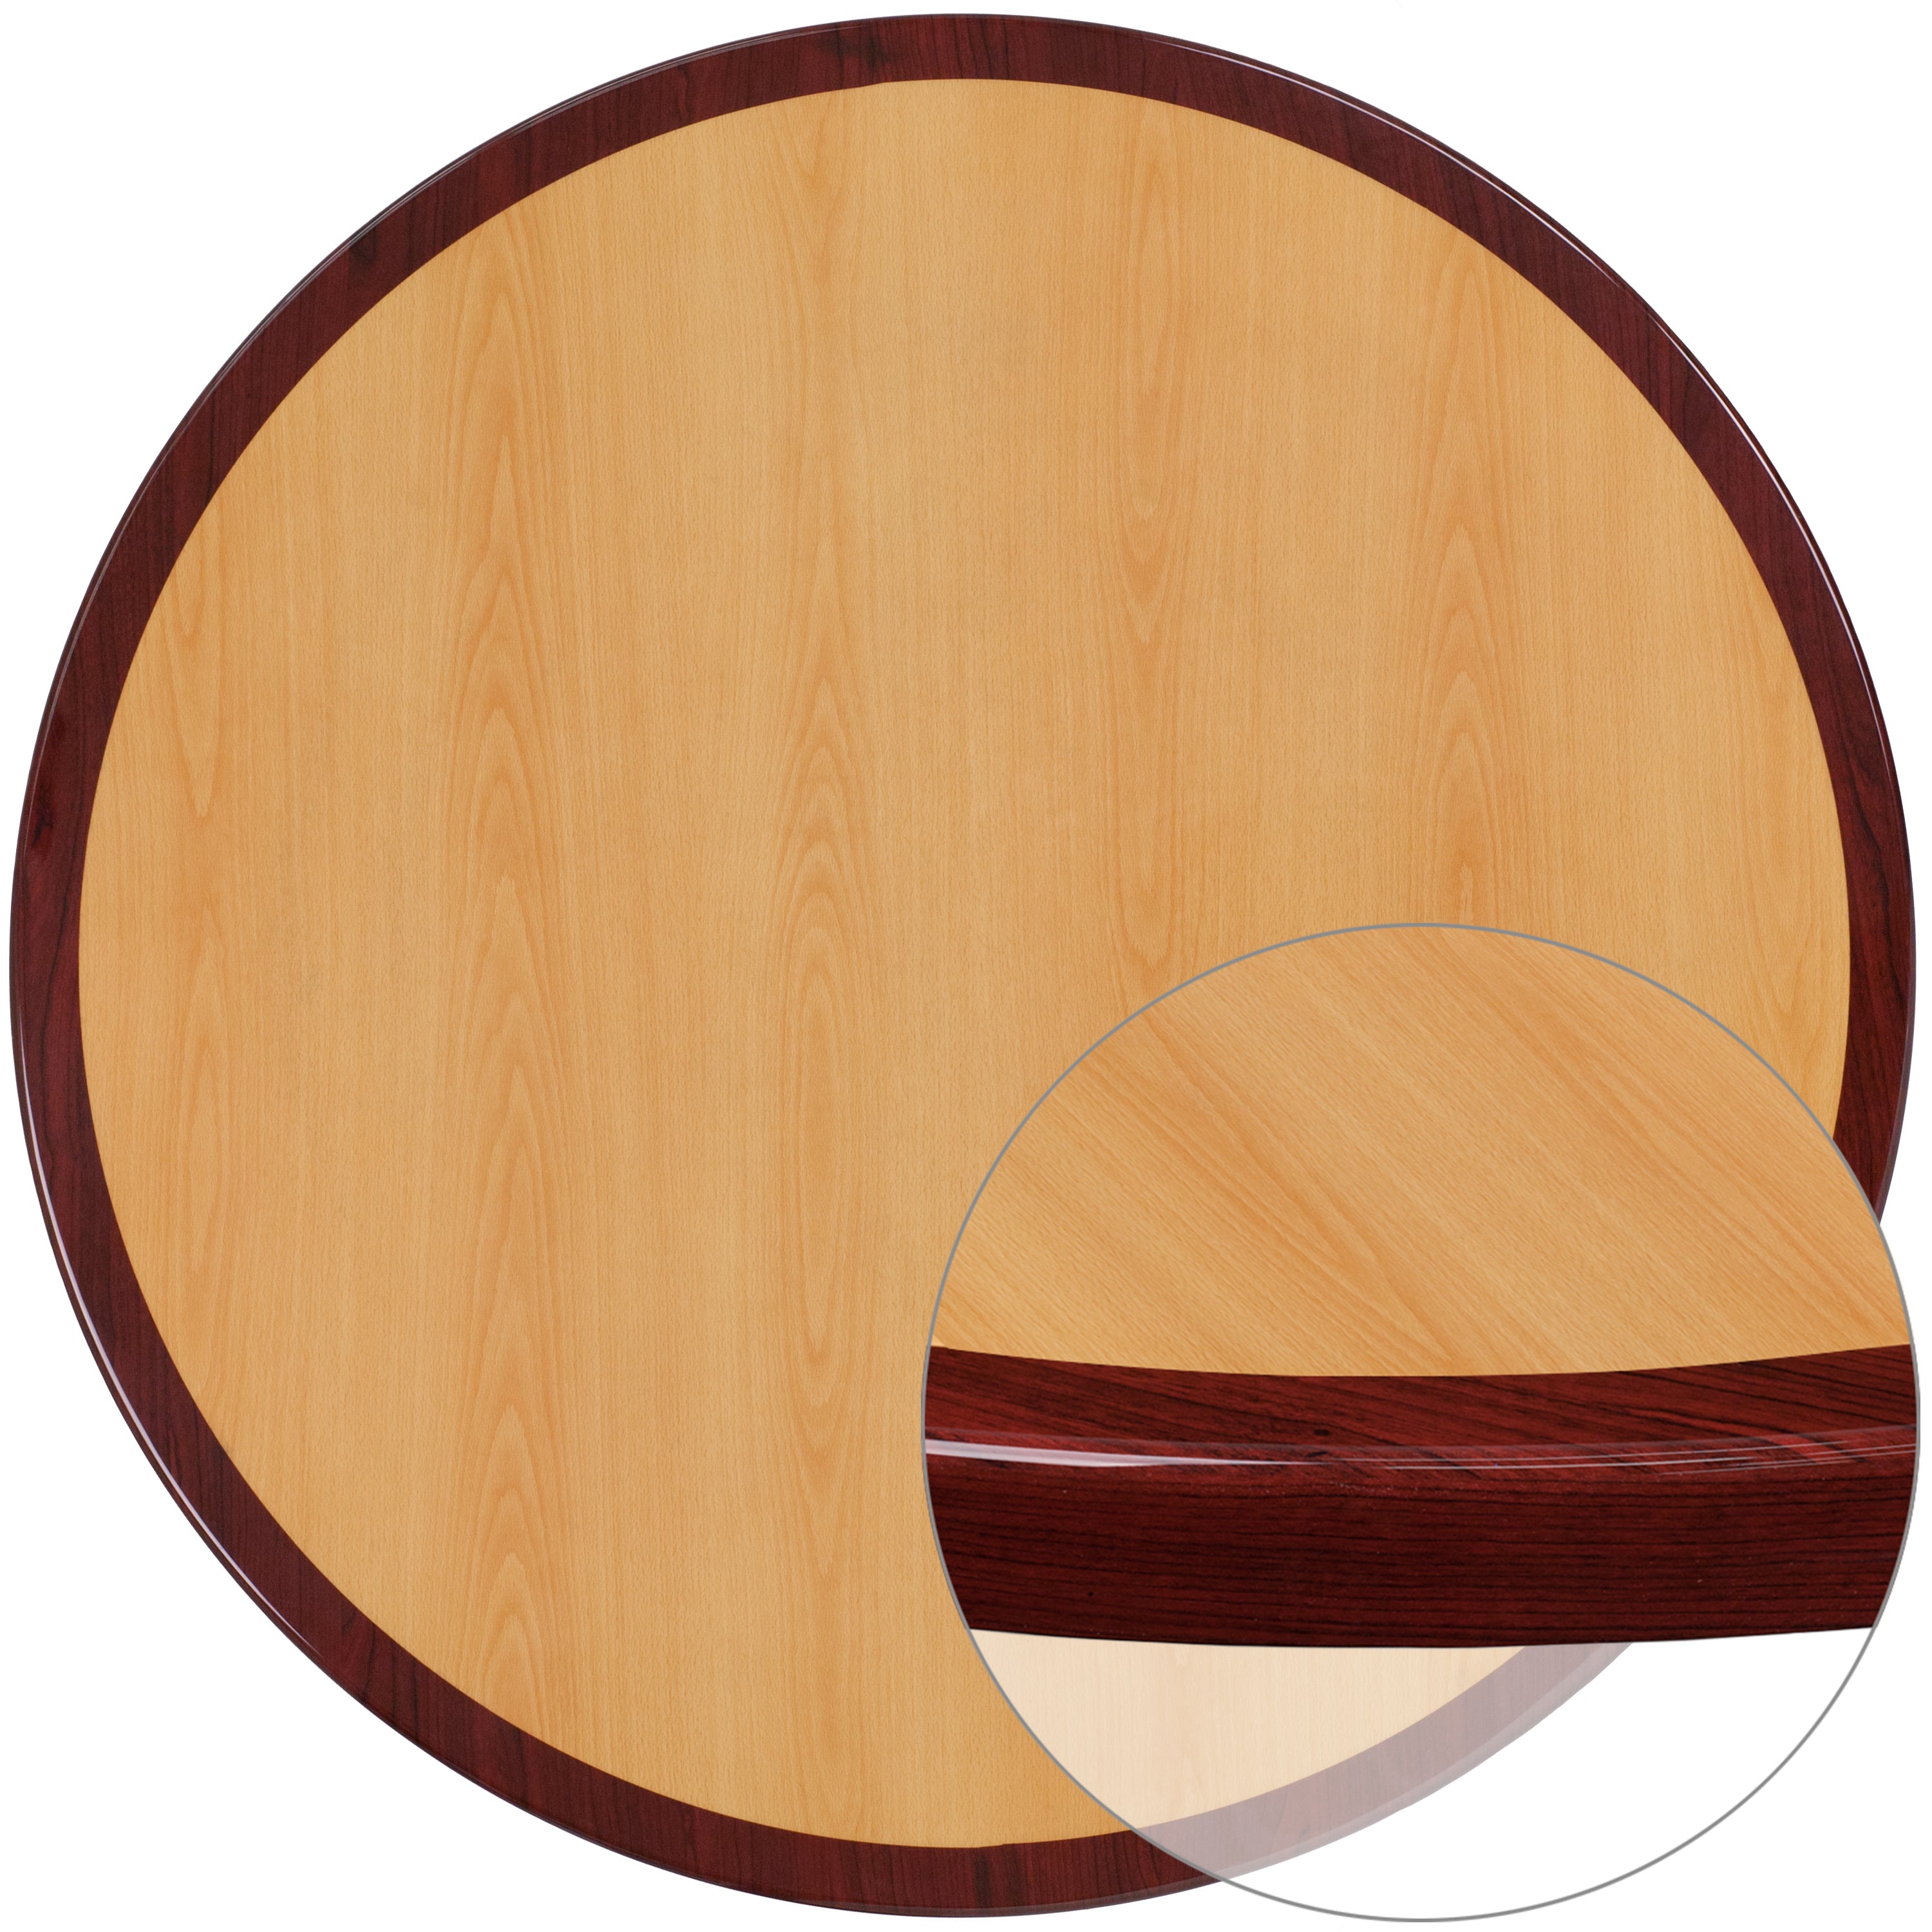 Glenbrook 24'' Round 2-Tone High-Gloss Cherry / Mahogany Resin Table Top with 2'' Thick Drop-Lip